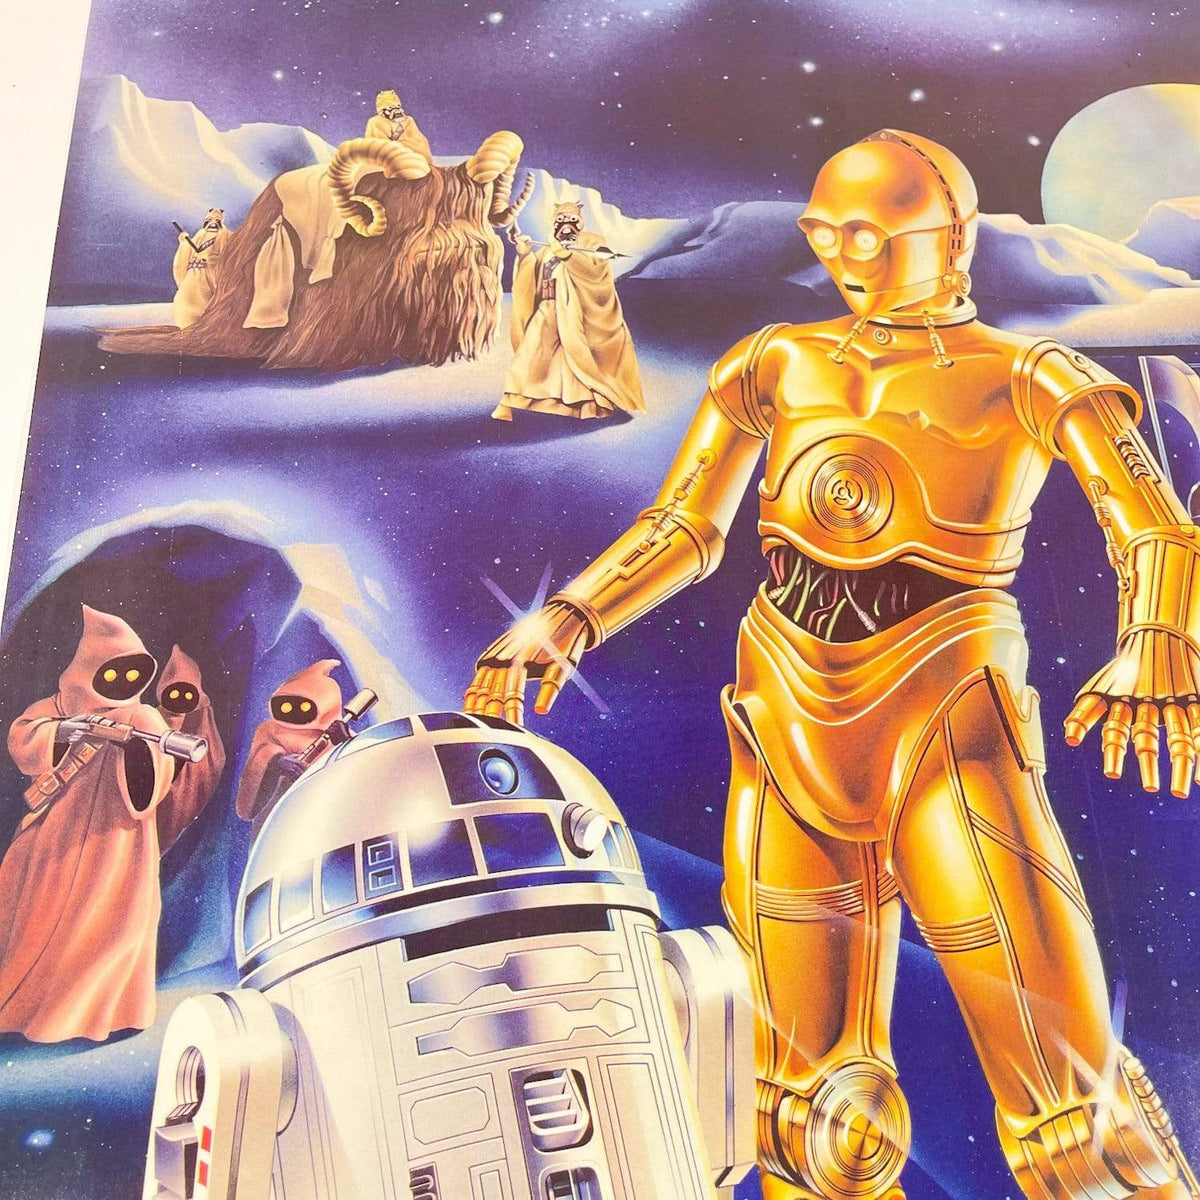 Unused 1980 Poster STAR WARS ESB Droids RED Proctor & Gamble Promo Poster 